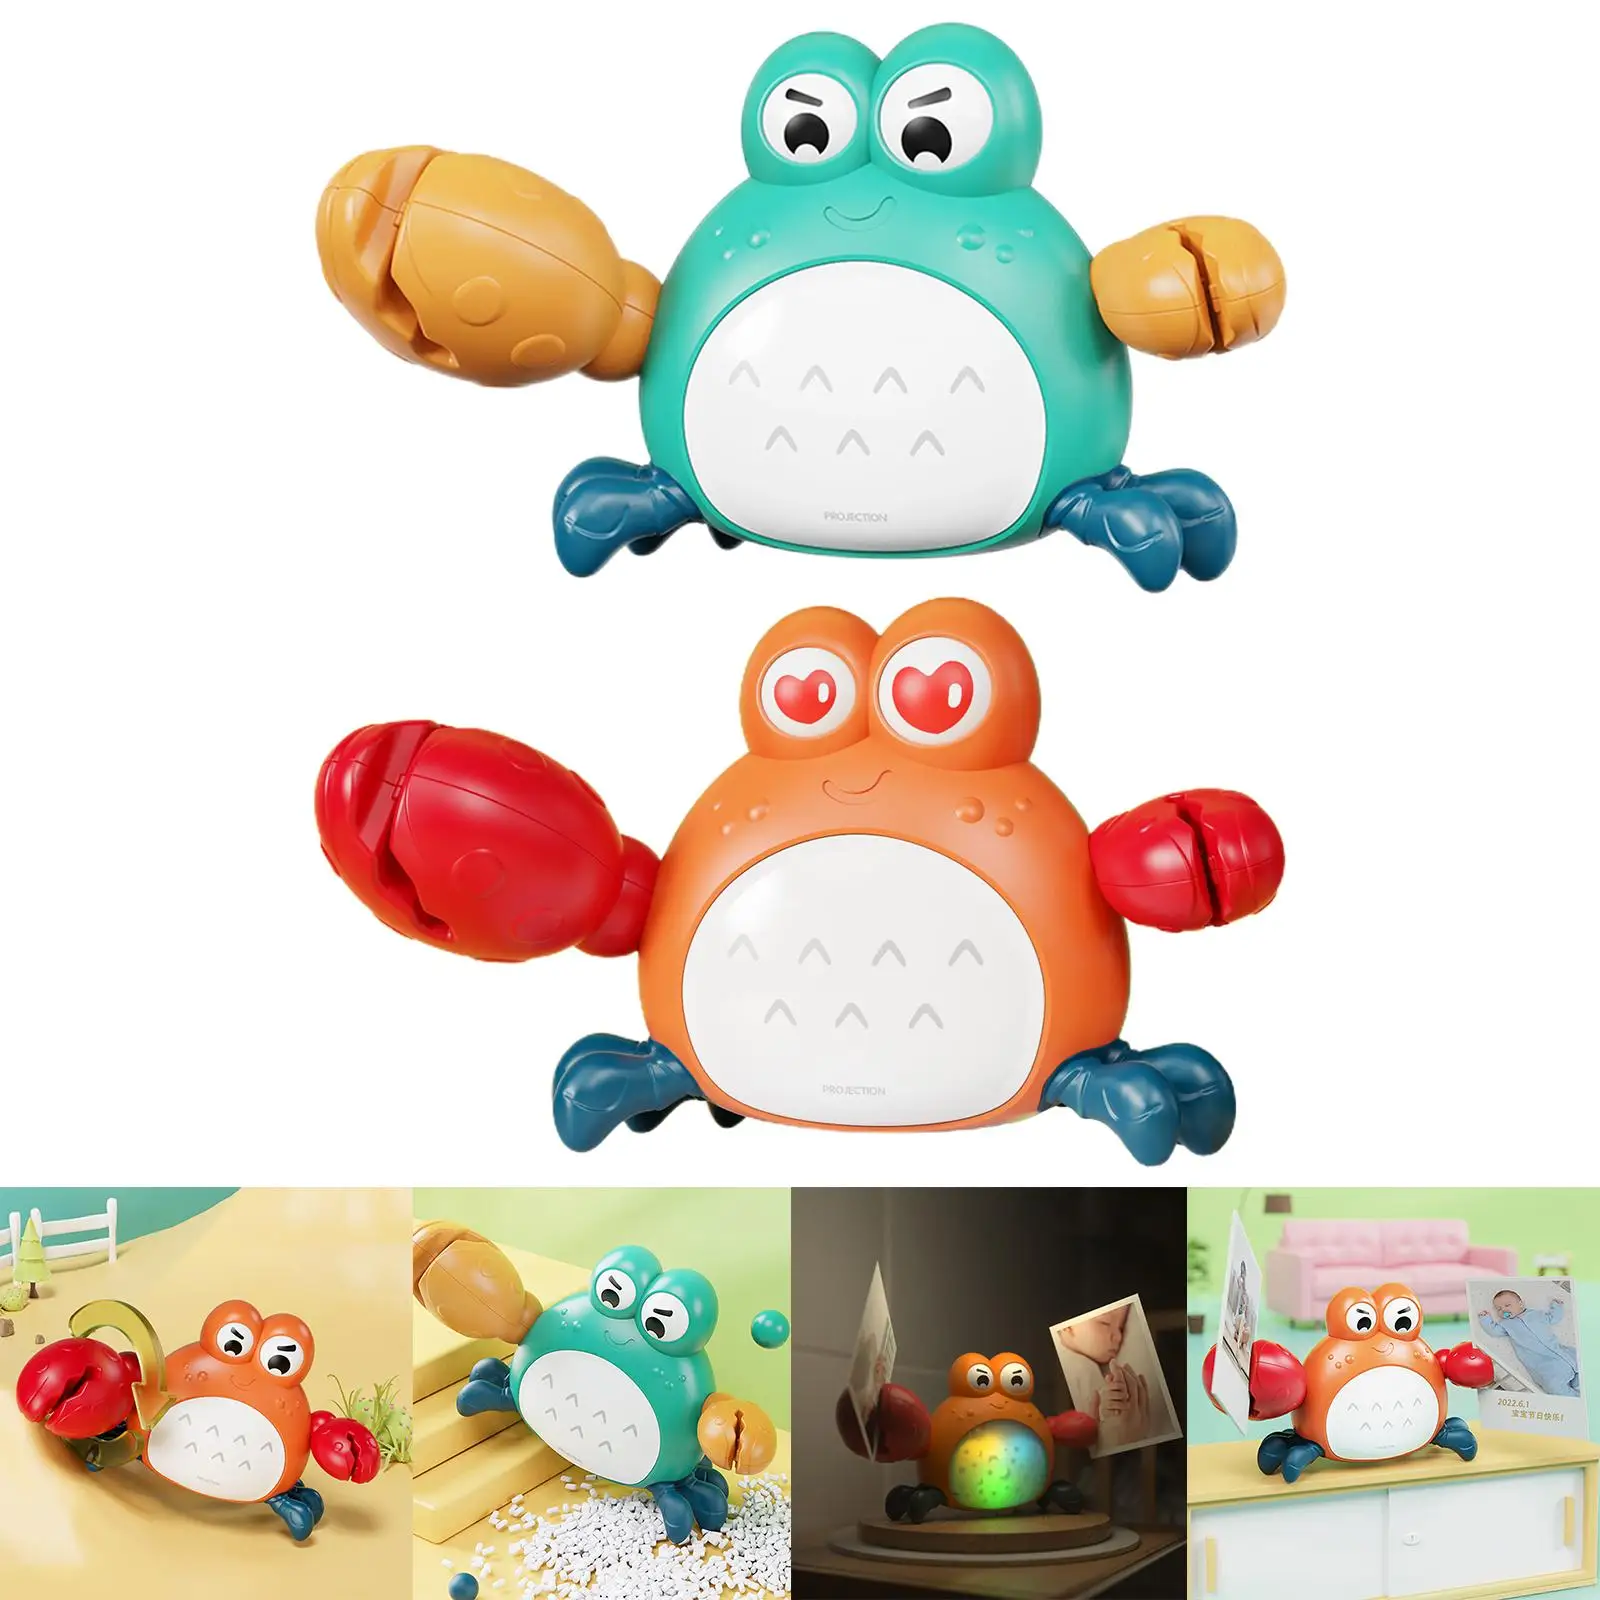  Electric Decoration Detachable Multipurpose Interactive PP Durable Gift LED Musical Toy for Kids Toddler Early Education